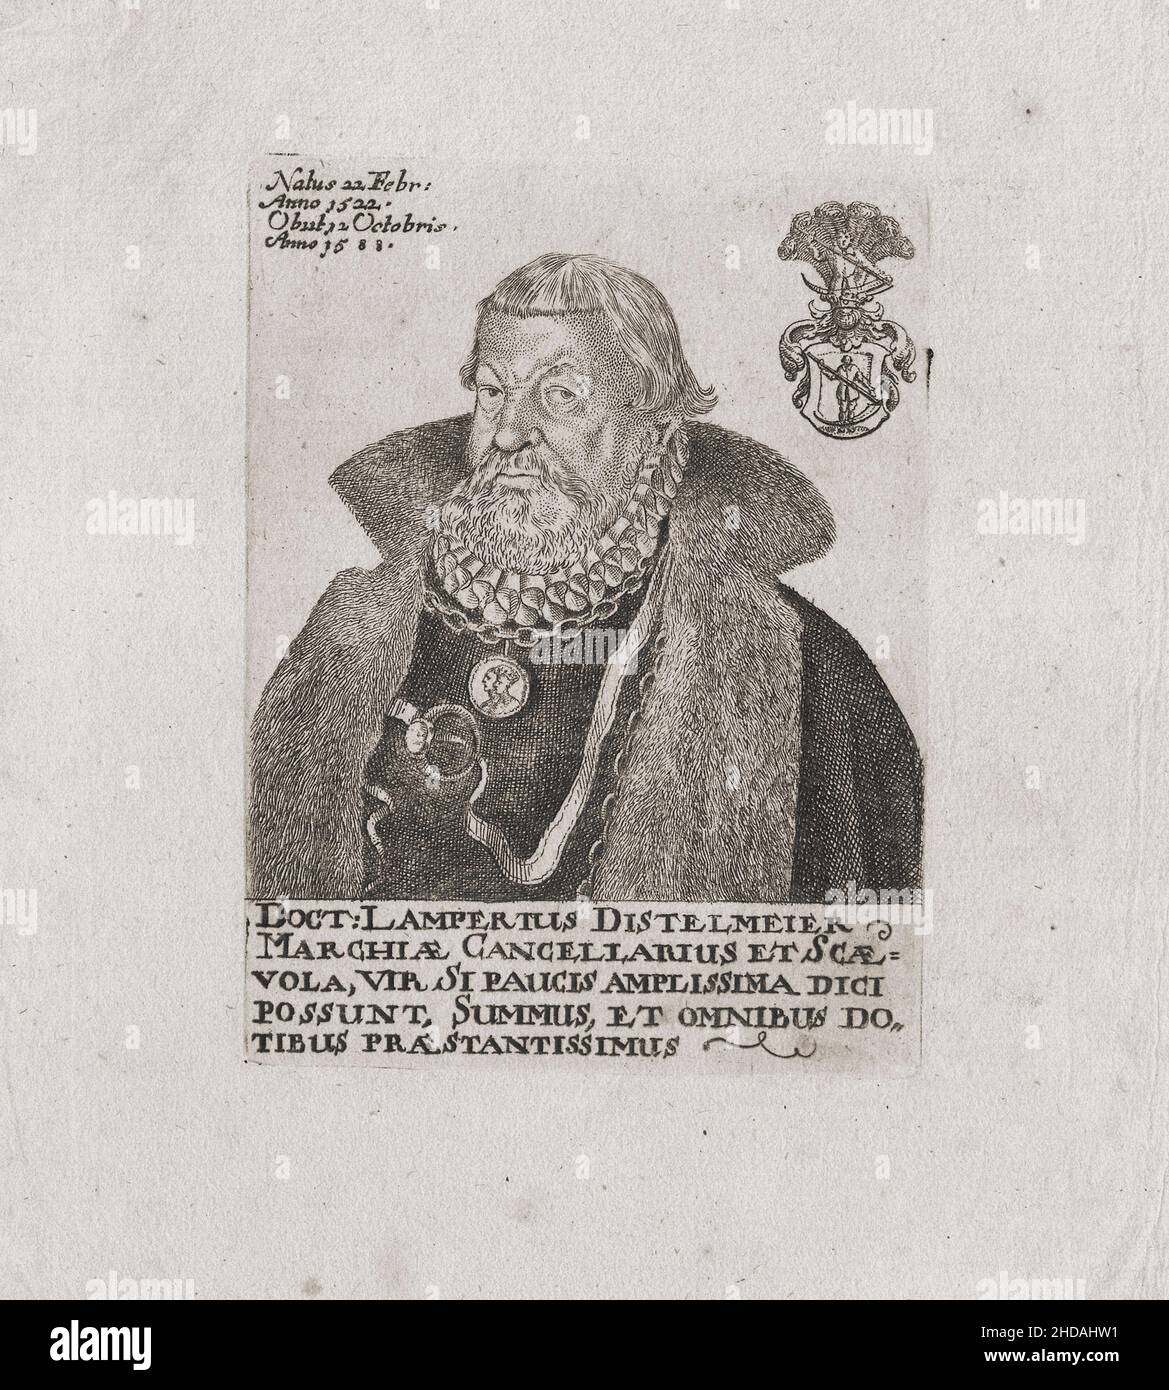 Engraving portrait of Lampert Distelmeyer. 1661 Lampert Distelmeyer, or Lamprecht Distelmeyer (1522 - 1588) was a German jurist and Chancellor of Mark Stock Photo